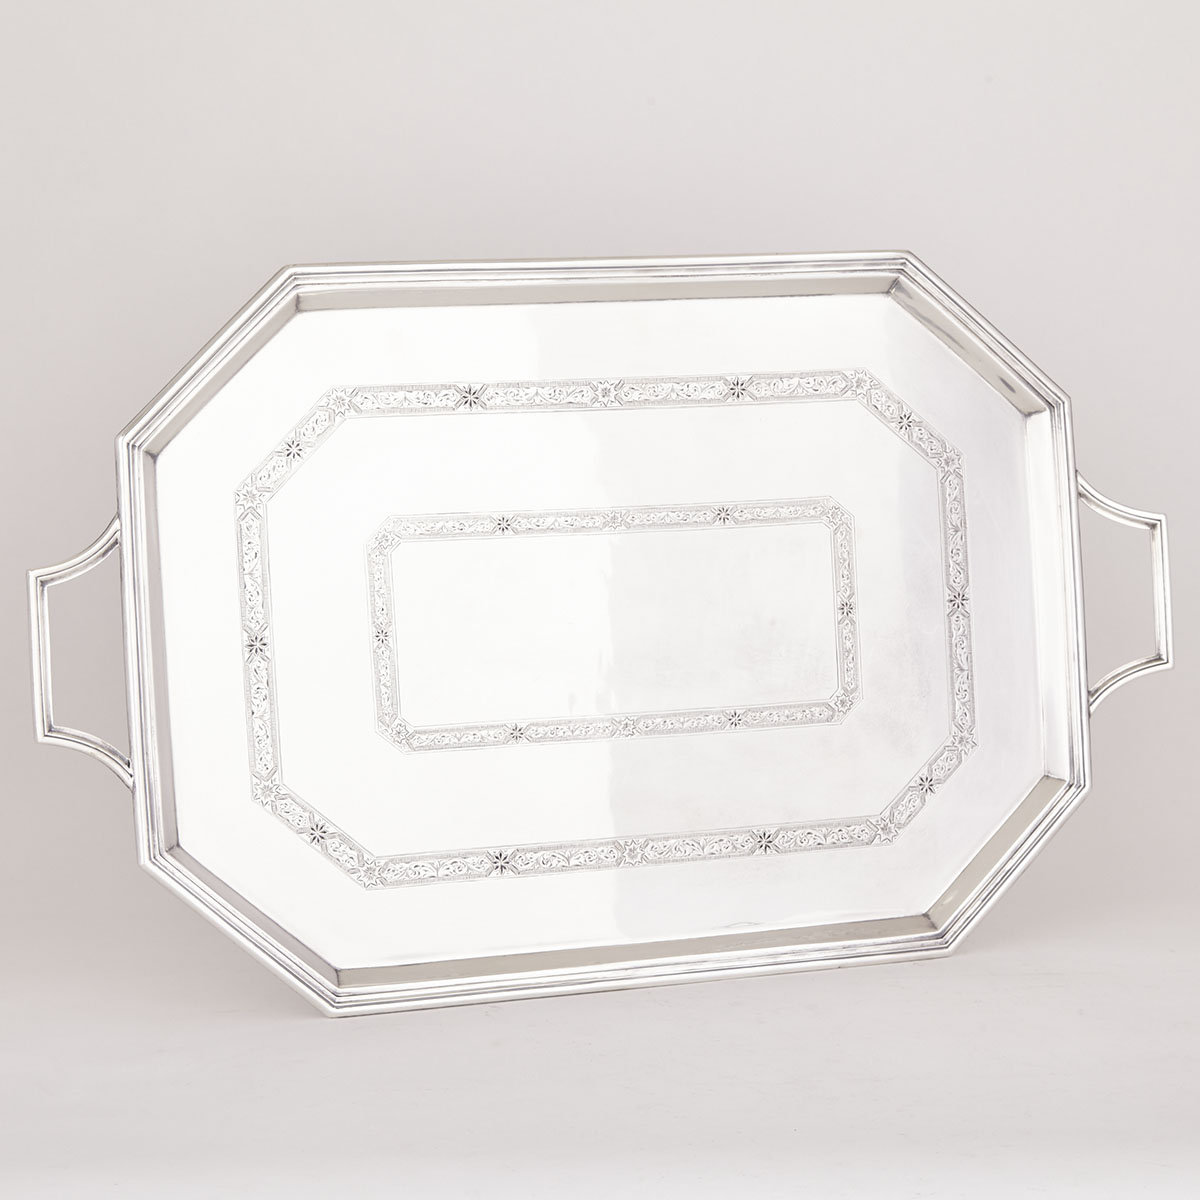 English Silver Two-Handled Octagonal Serving Tray, Cooper Bros. & Sons, Sheffield, 1922